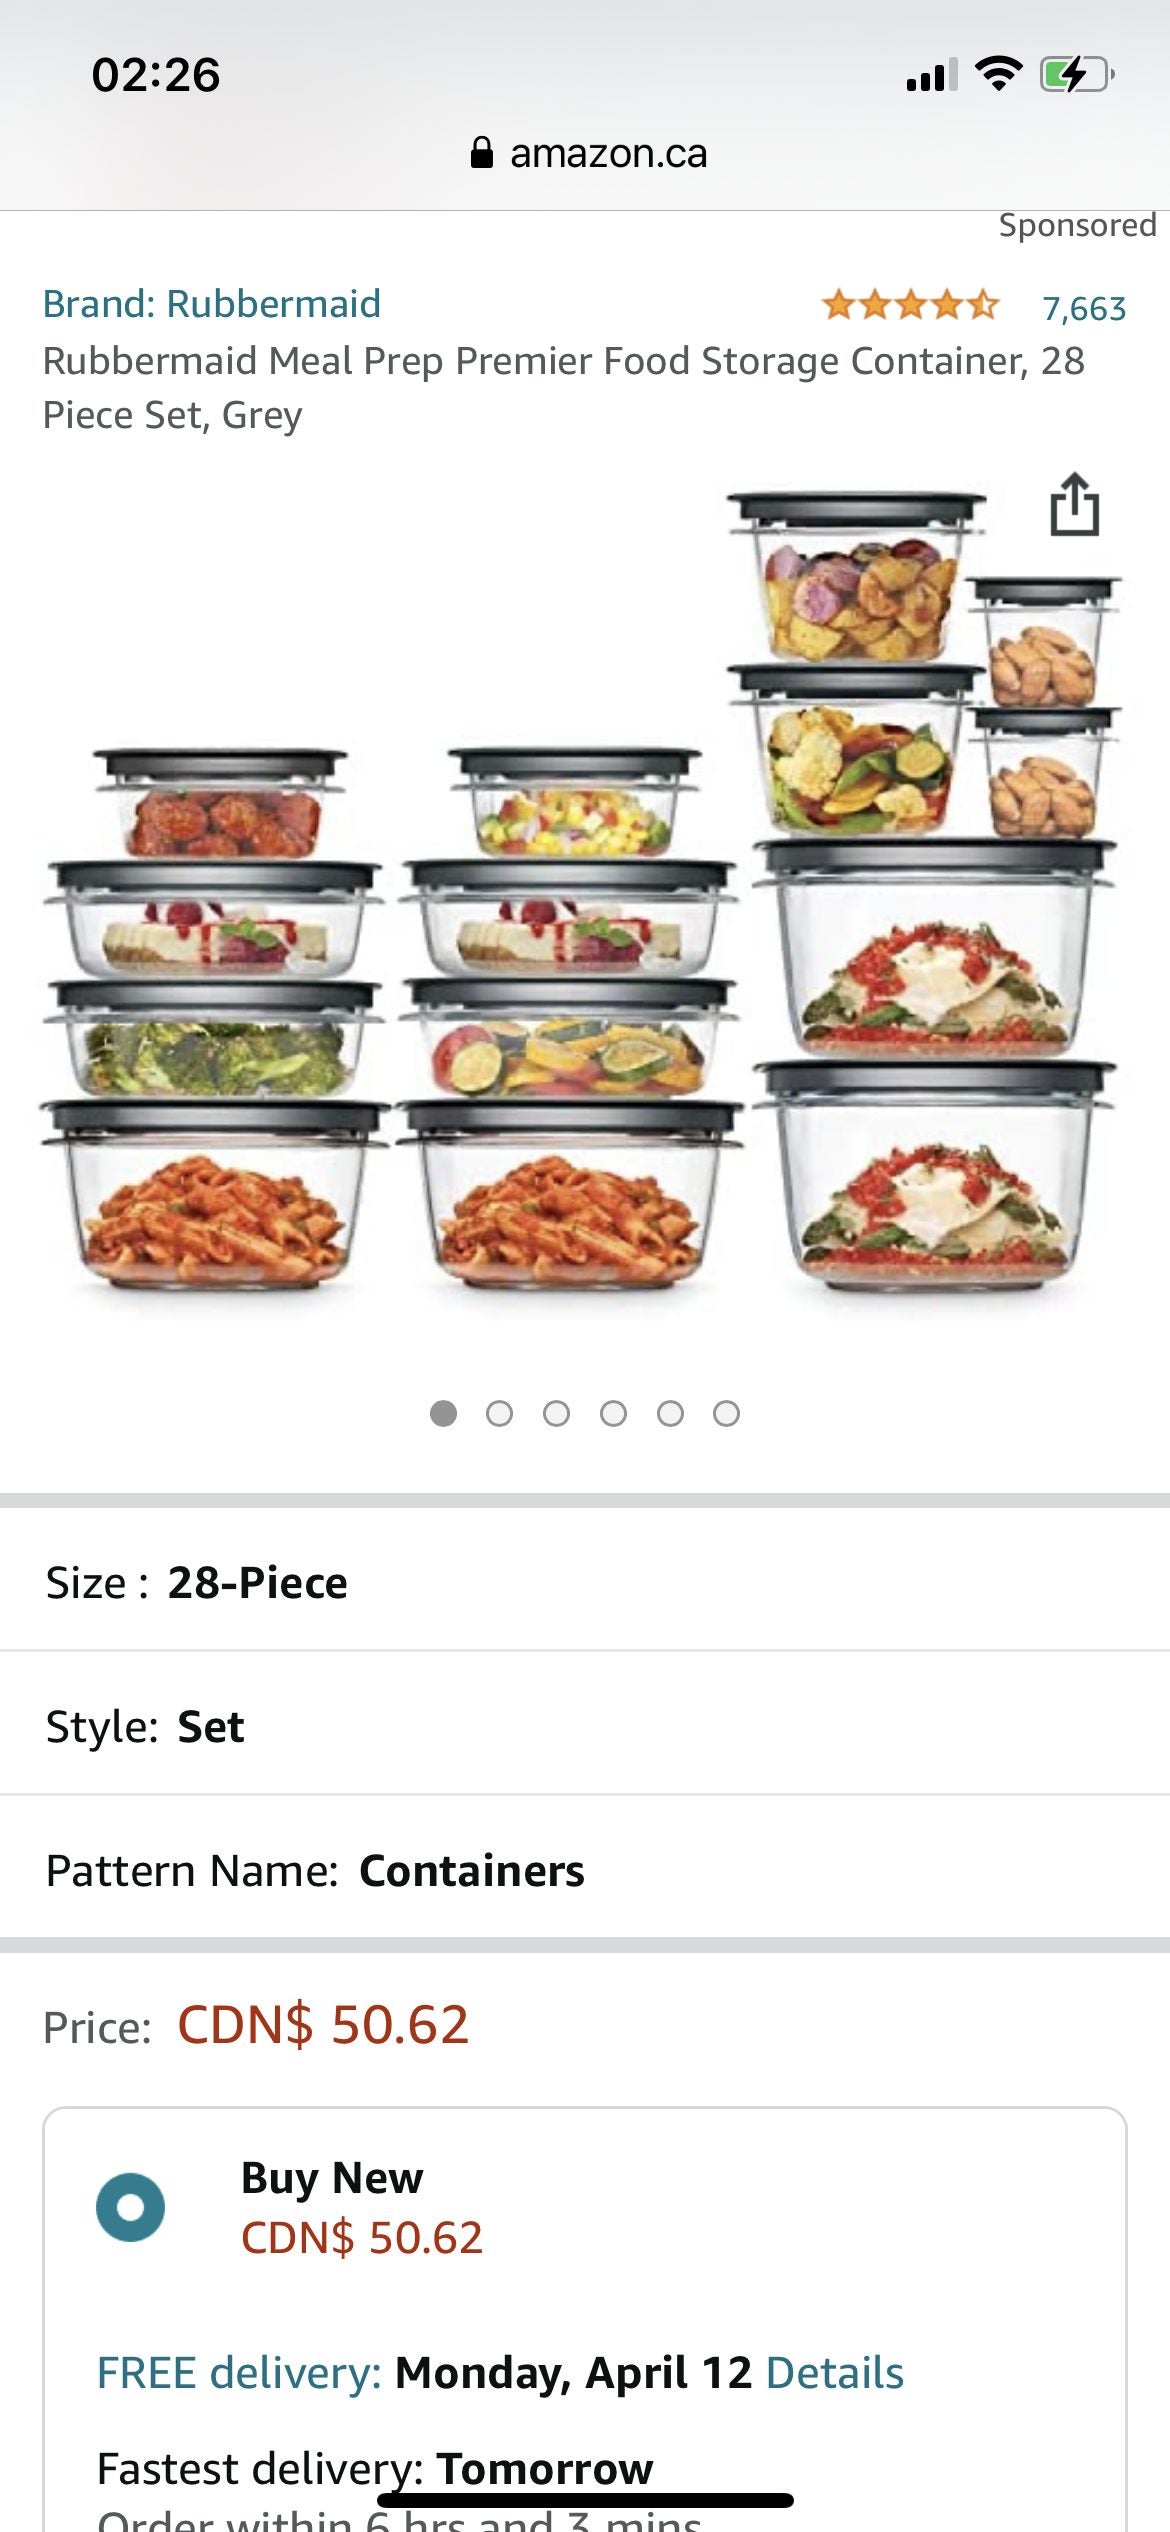 Rubbermaid Meal Prep Premier Food Storage Container, 28 Piece